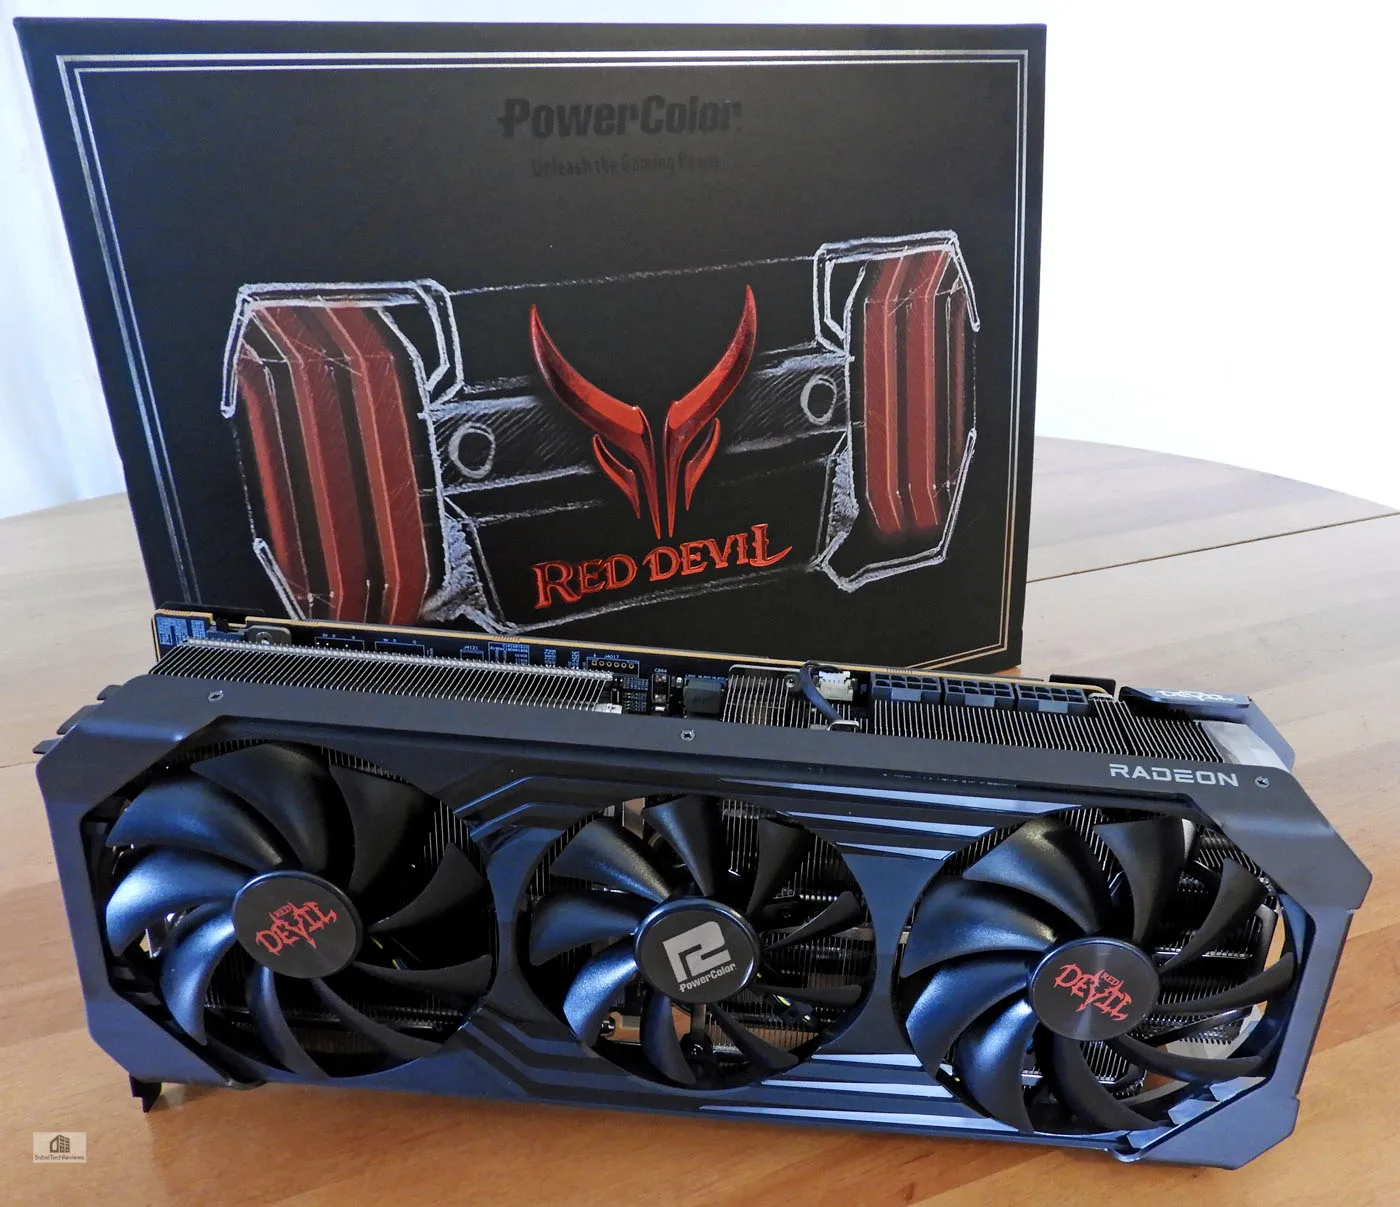 The Red Devil RX 6900 XT 50-game Review vs. the RTX 3090 FE (Part